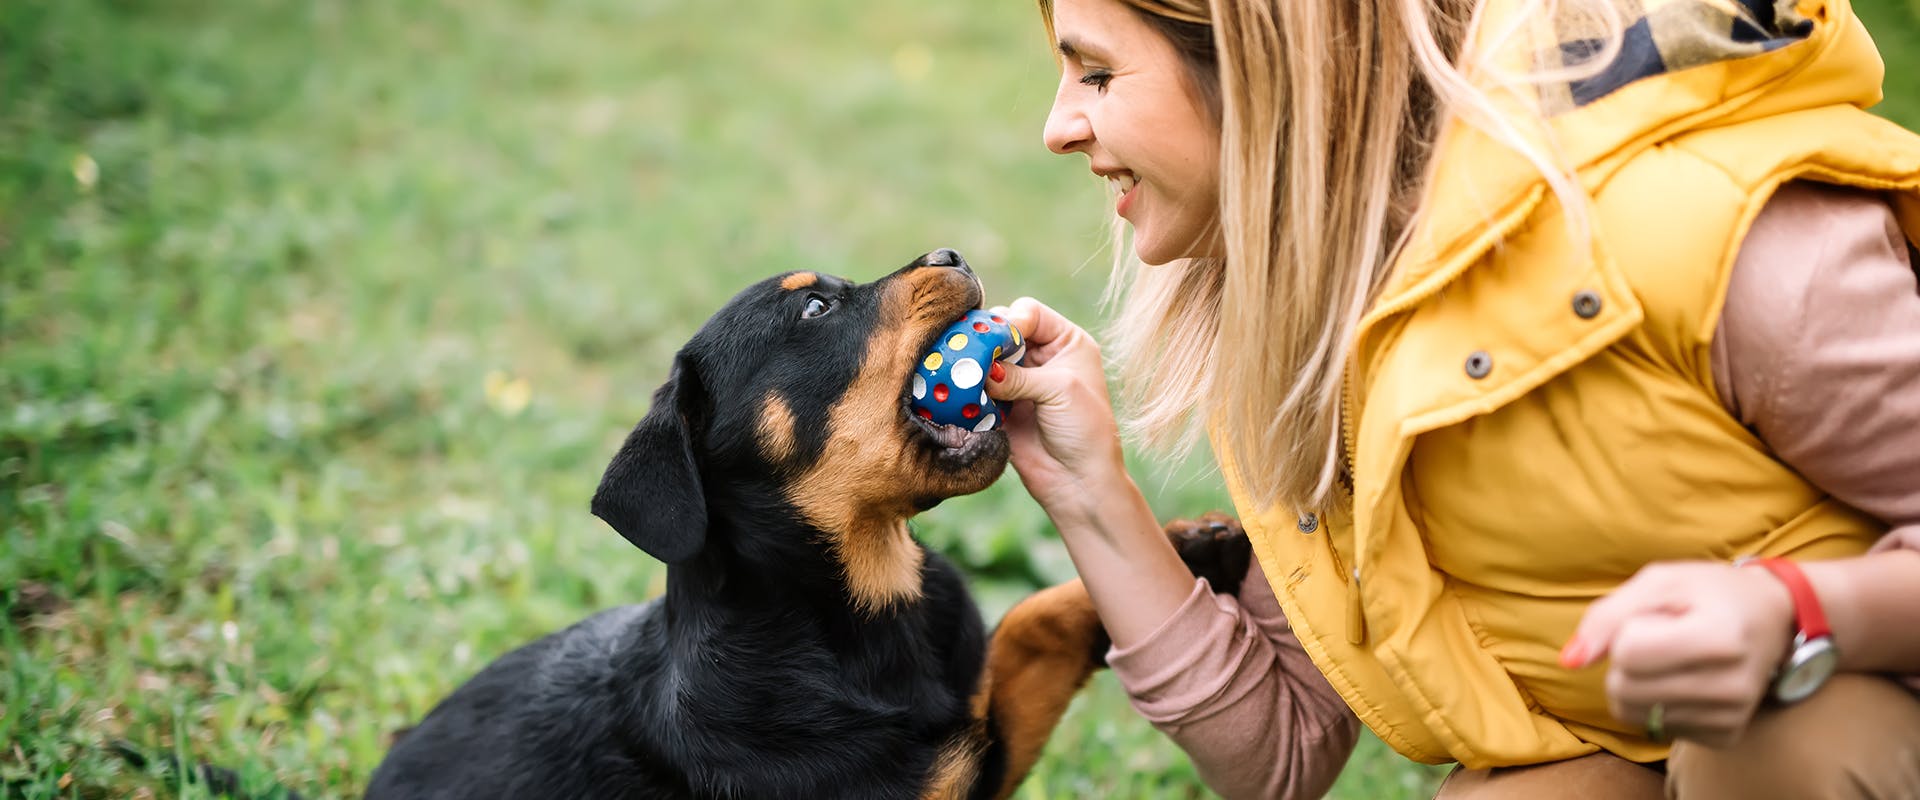 A woman playing ball with a small Rottweiler puppy